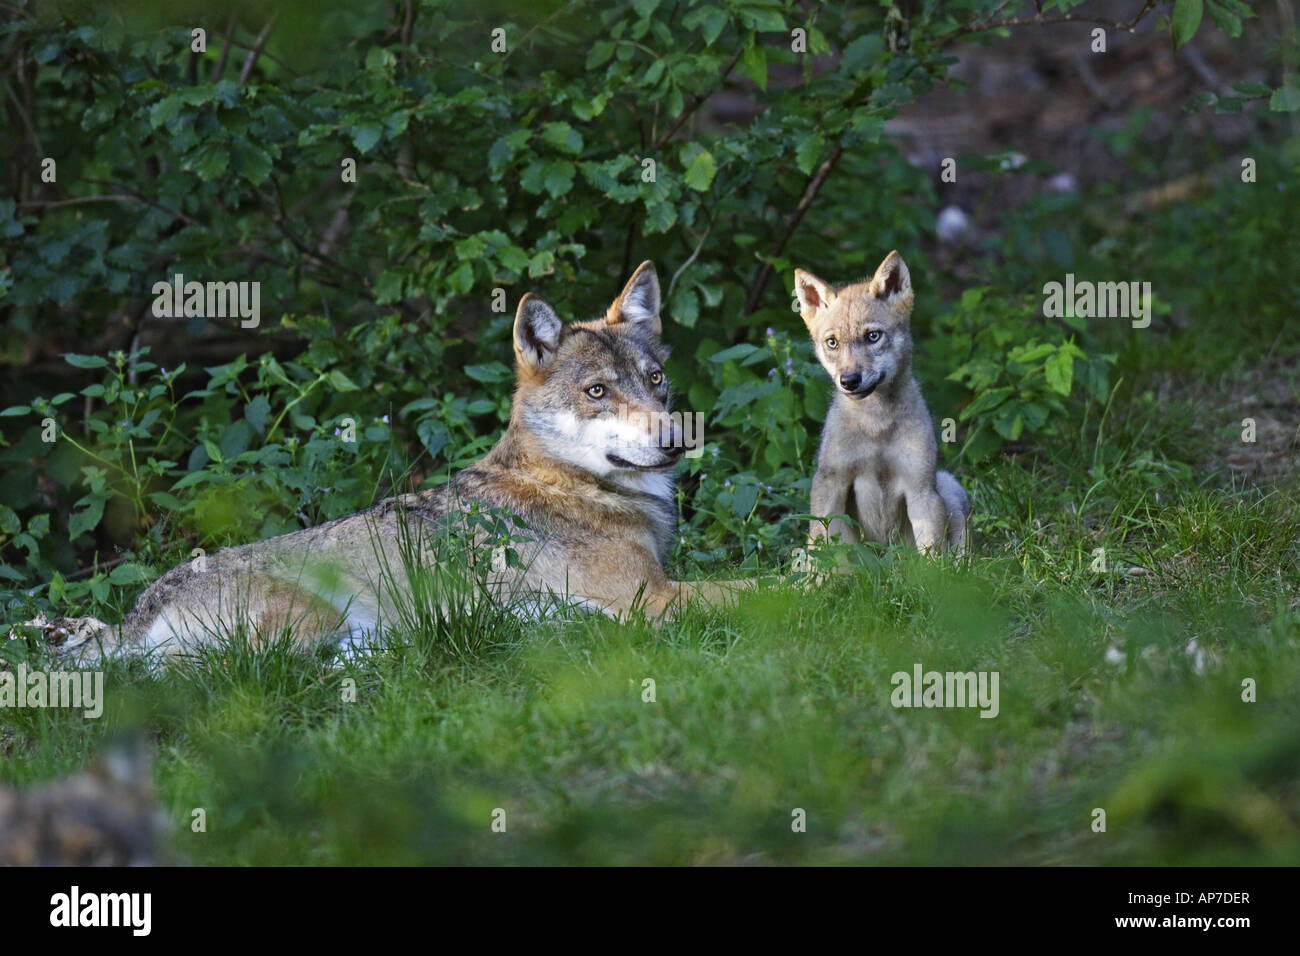 Junger Wolf, bambino, baby, Canis lupus, lupi Foto Stock